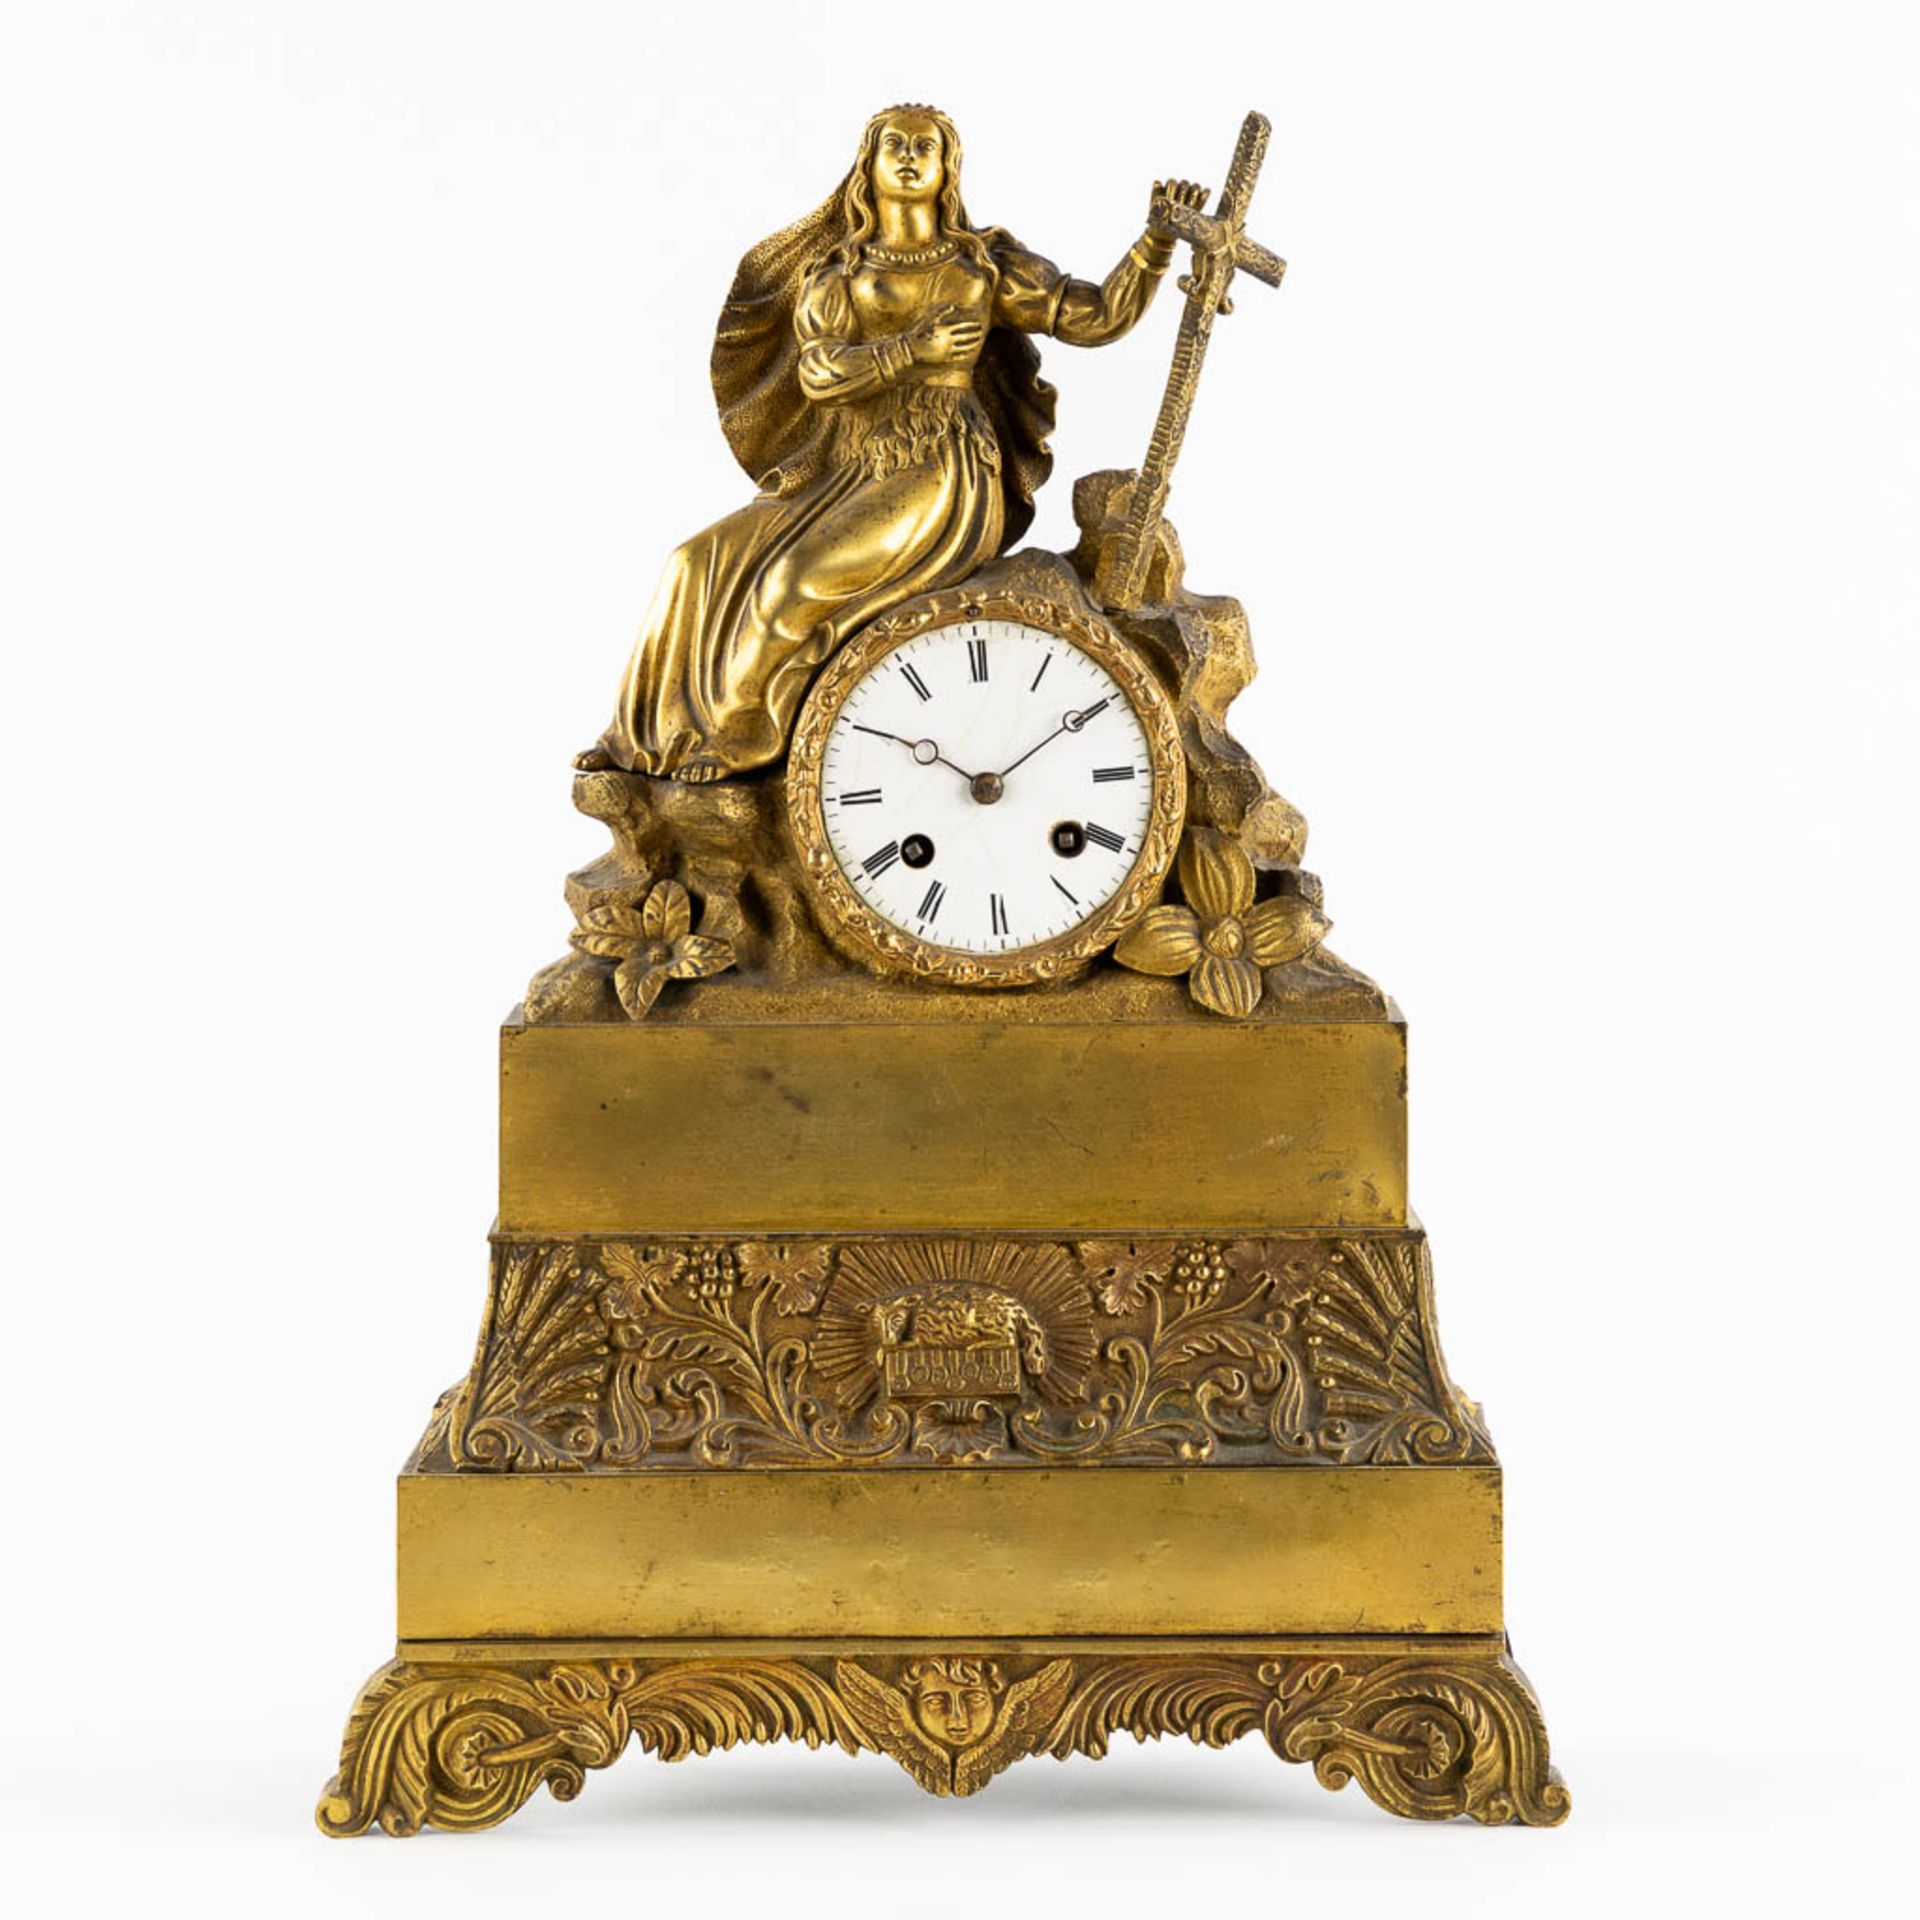 A mantle clock with a religious scène, gilt bronze in a Louis Philippe style. 19th C. (L:10 x W:30 x